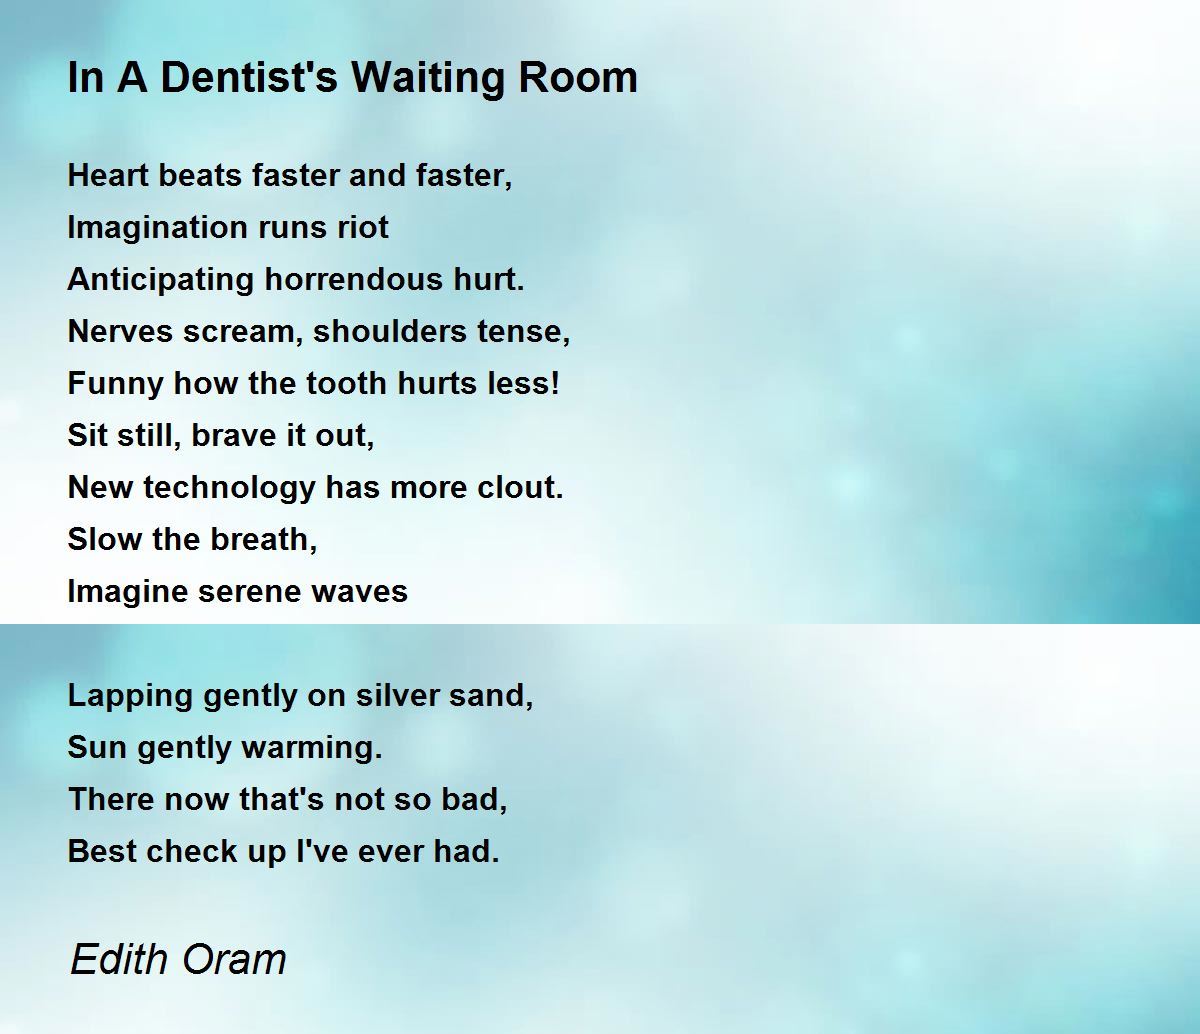 In A Dentist's Waiting Room - In A Dentist's Waiting Room Poem by Edith Oram